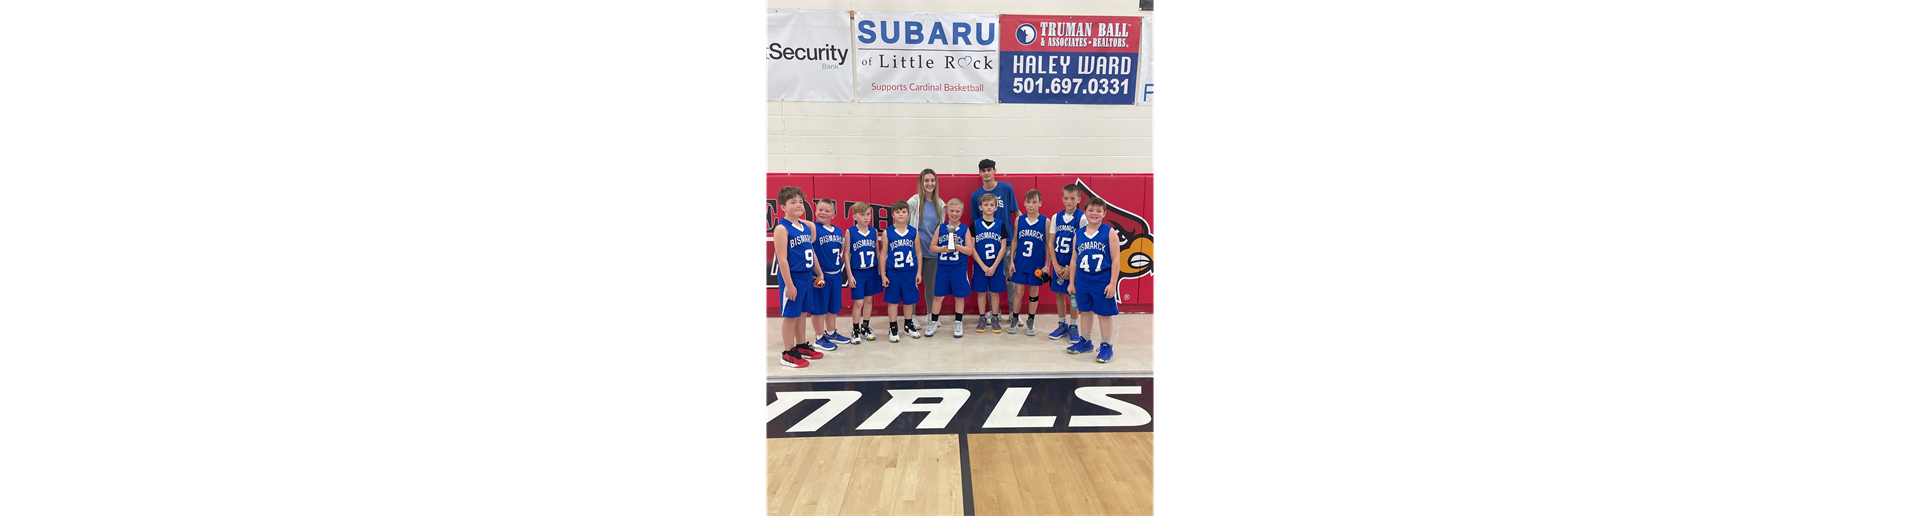 2022 4th Grade Conference Runners-Up